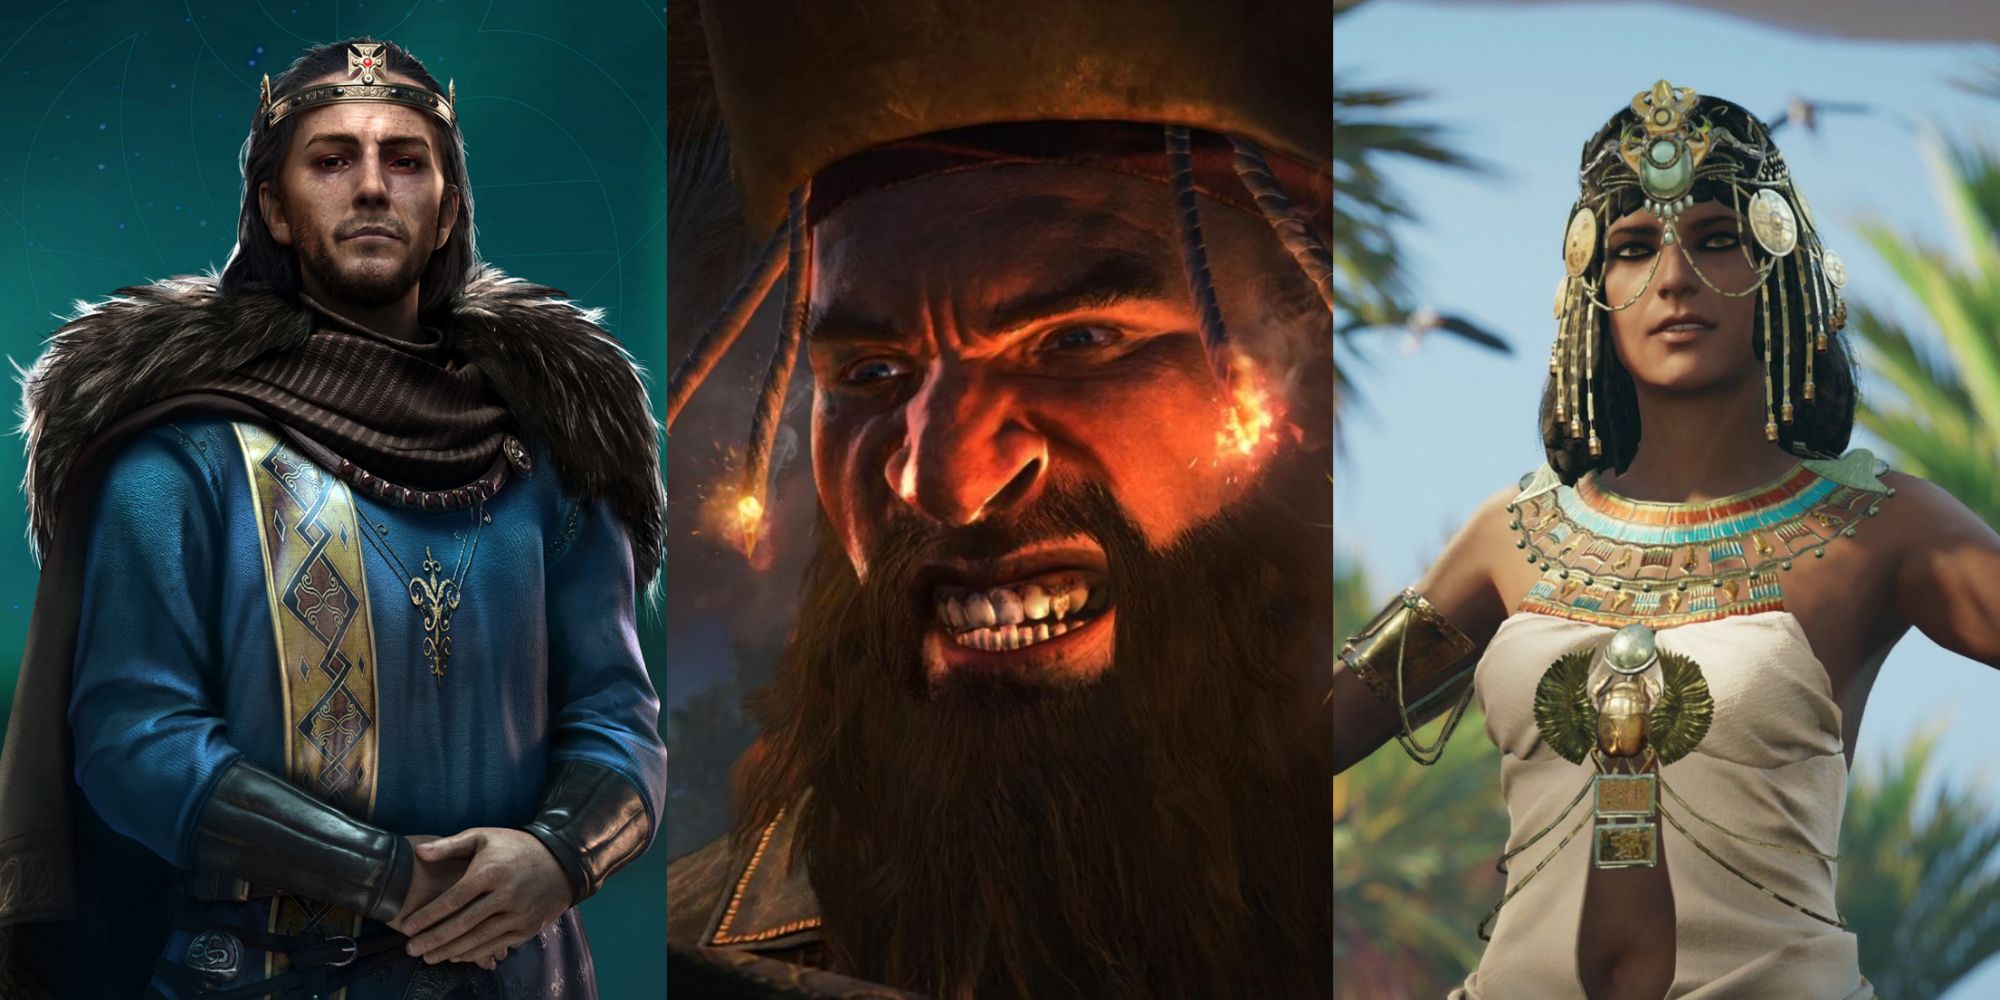 combined images of Alfred the Great, Queen Cleopatra, and Blackbeard from Assassin's Creed games